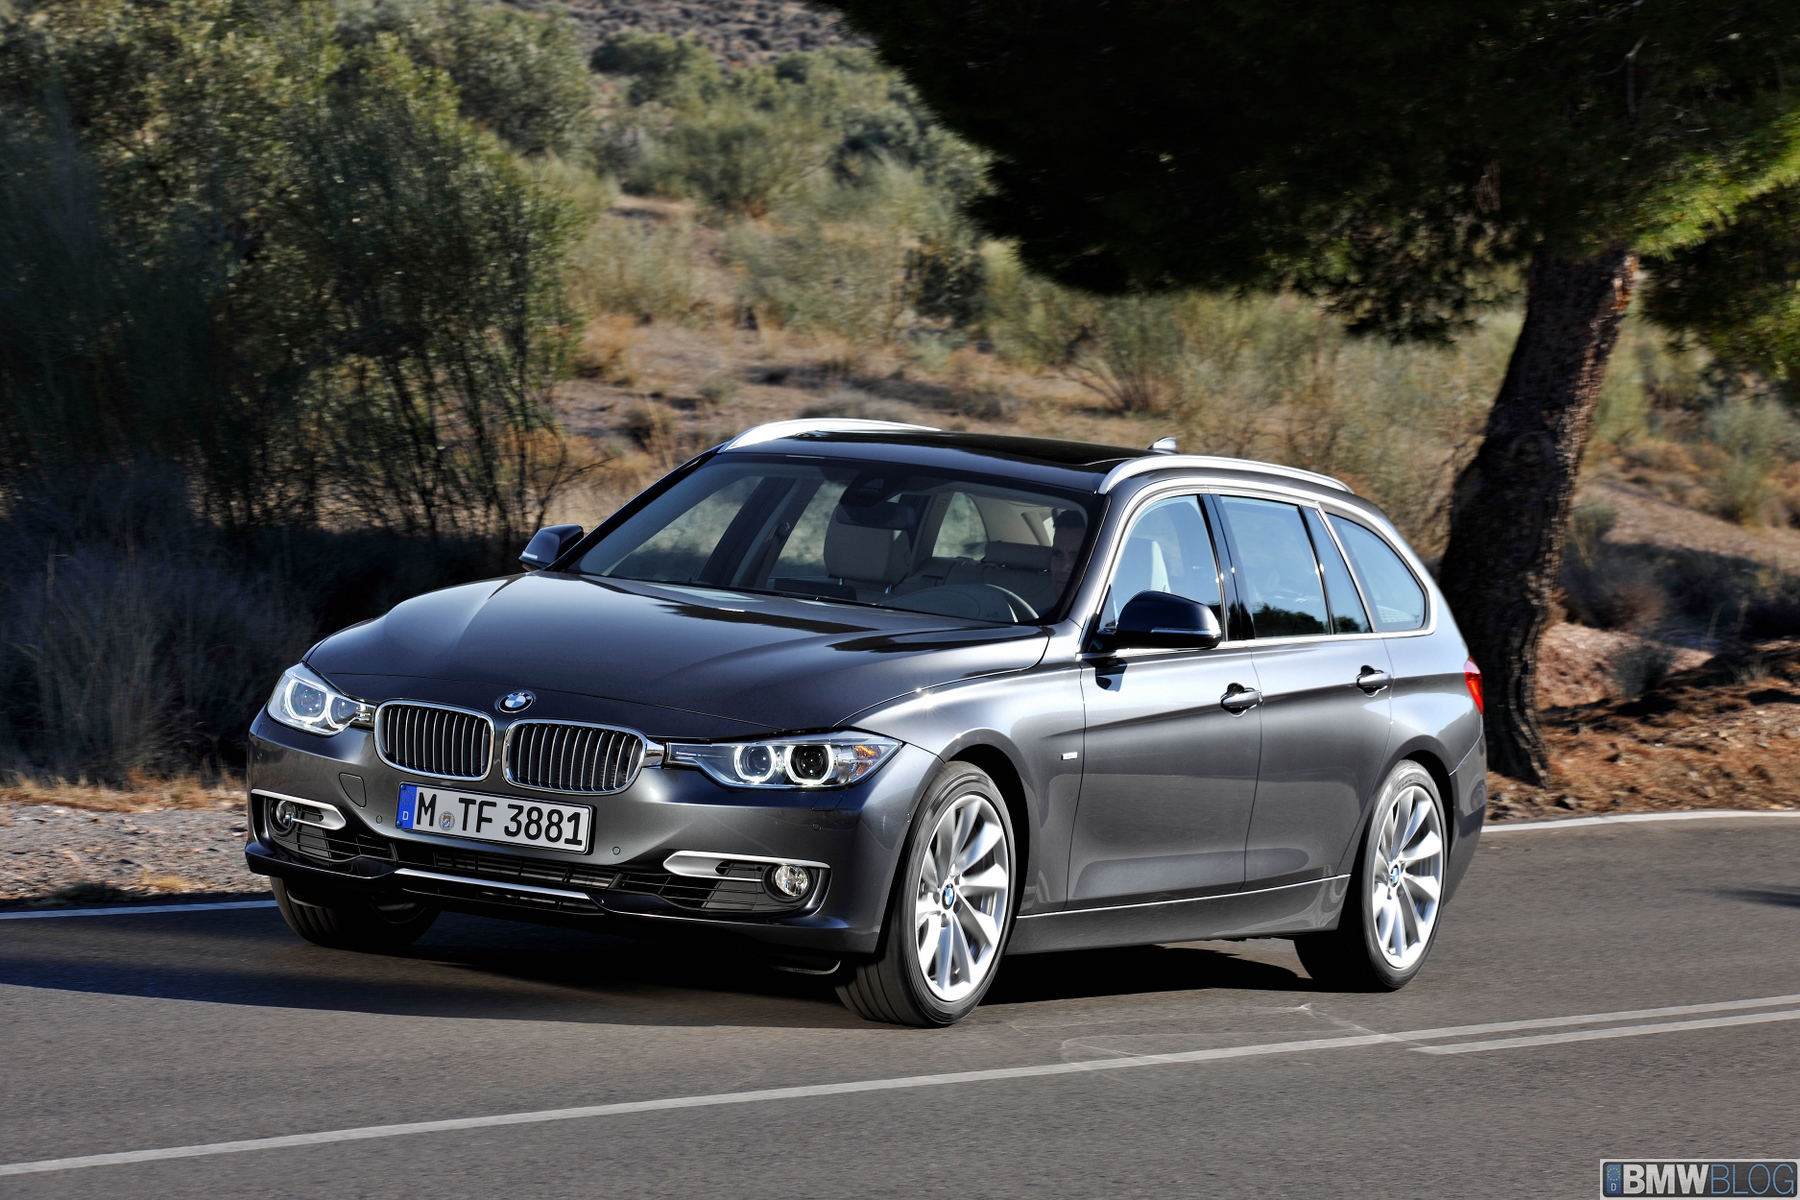 BMW 3 Series Touring Pics, Vehicles Collection